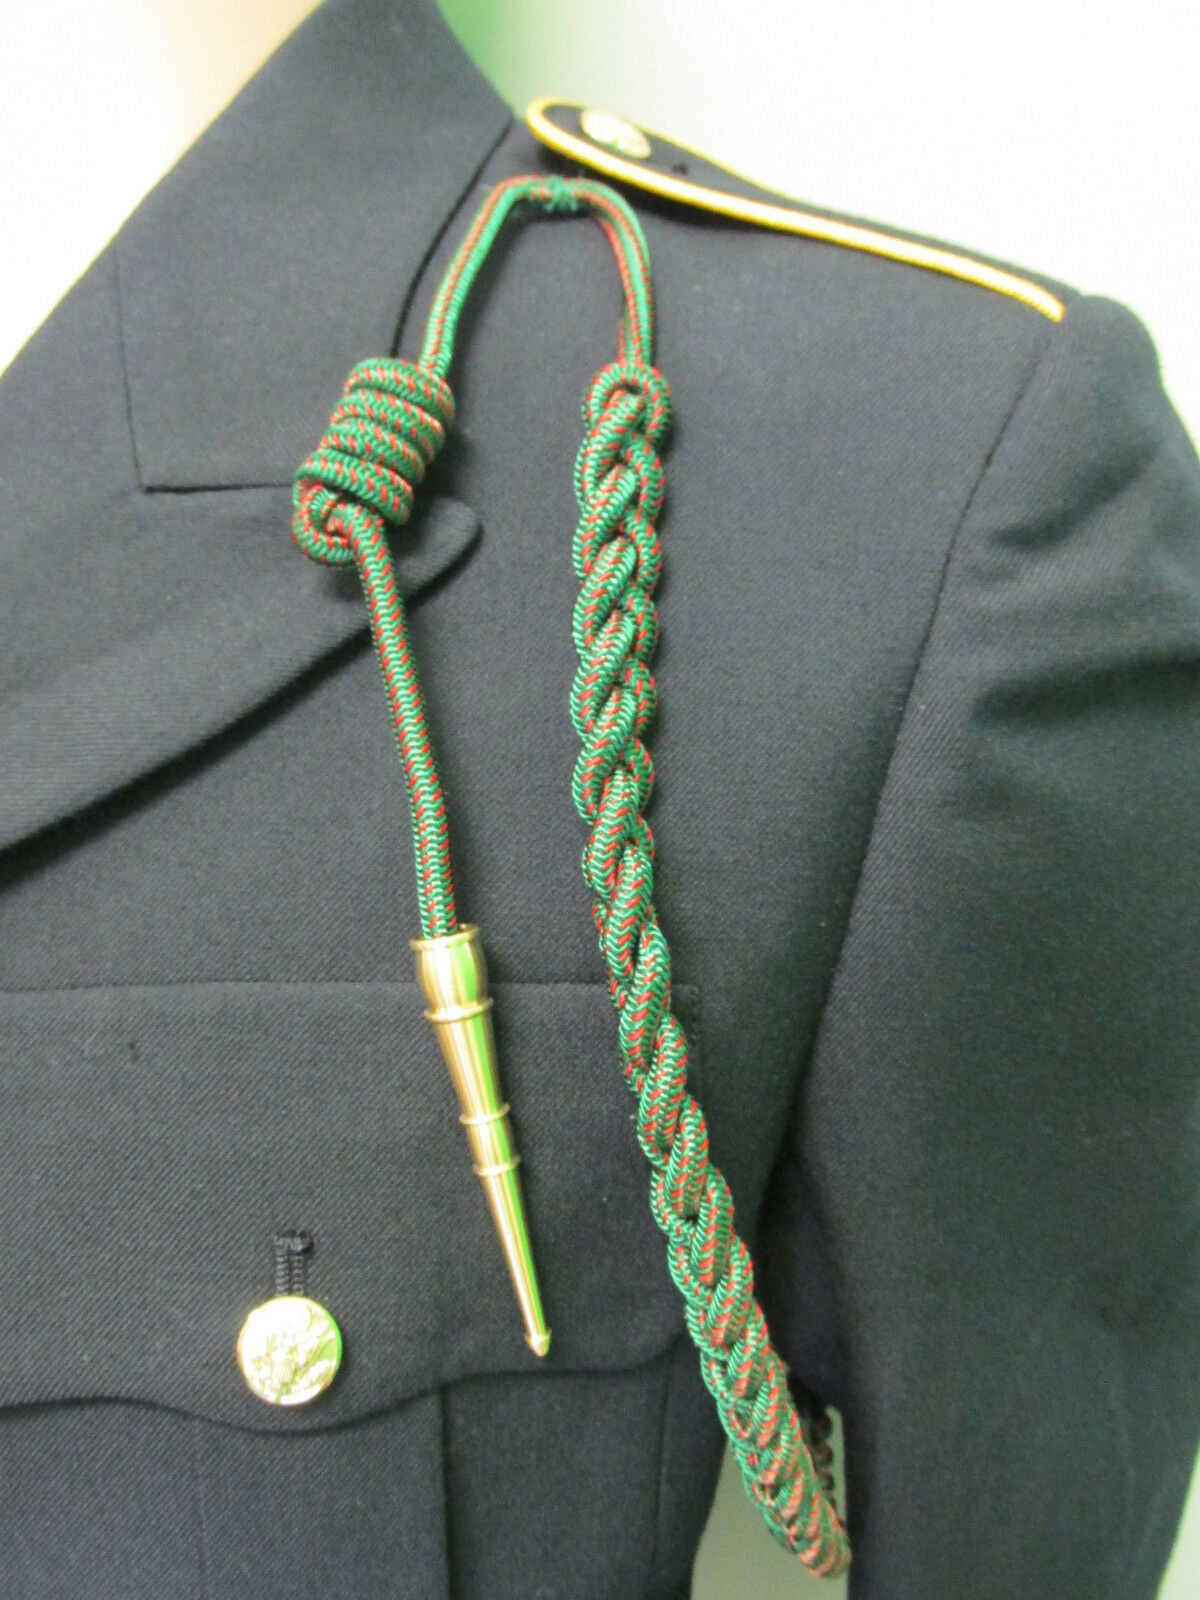 Army Shoulder Cords - Army Military